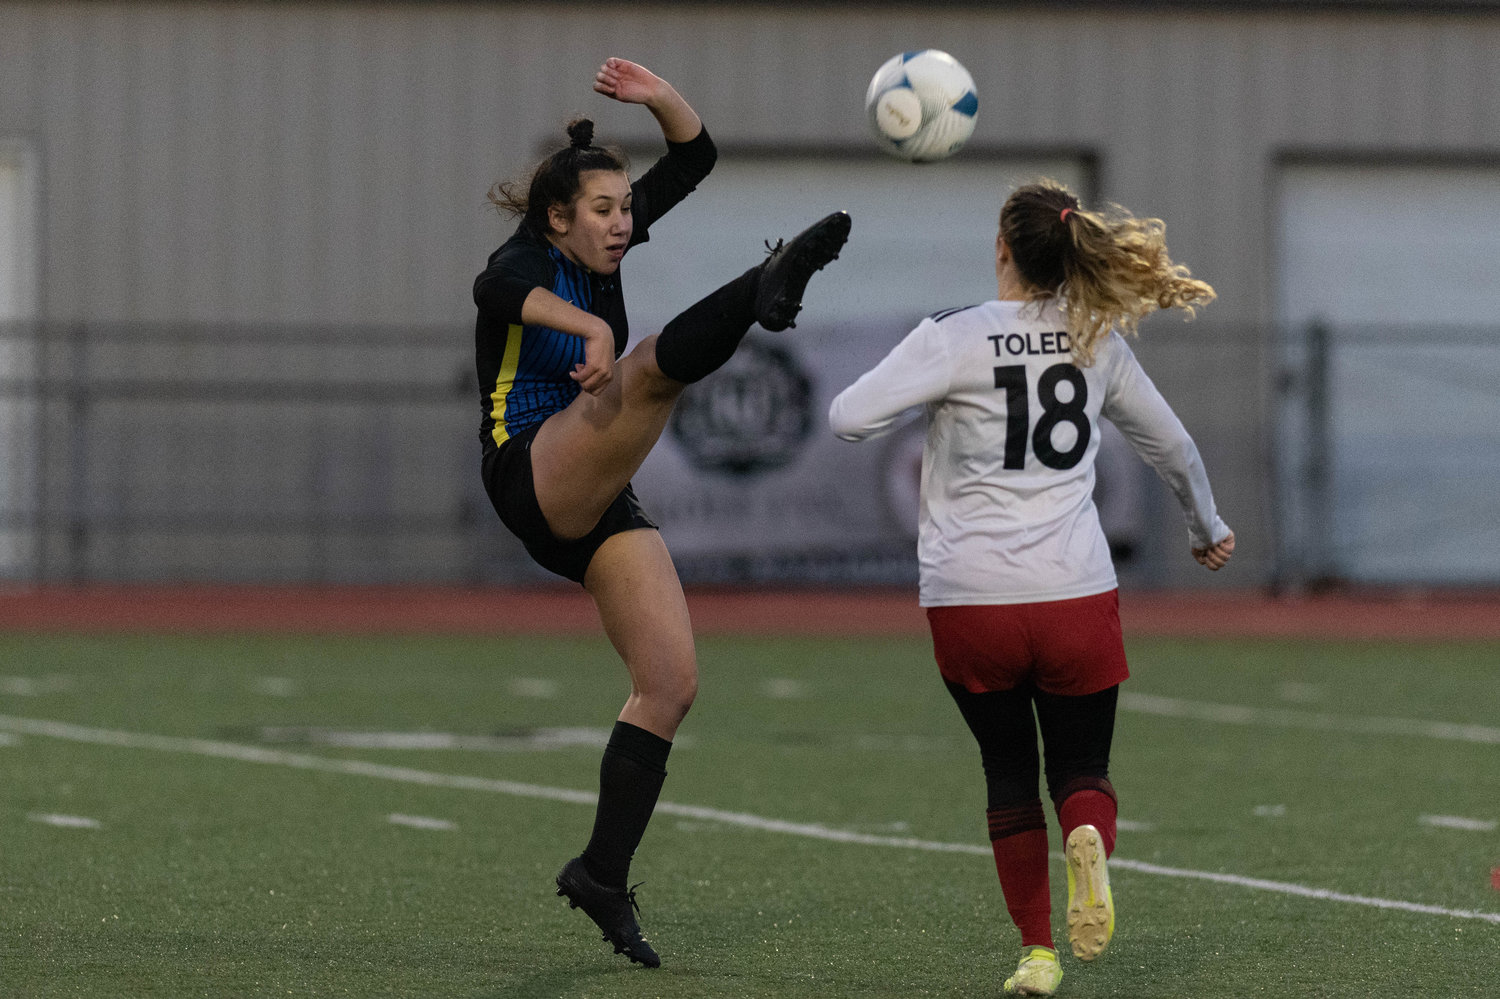 An Adna player kicks a ball in midair against Toledo in the 2B state semifinals Nov. 19.